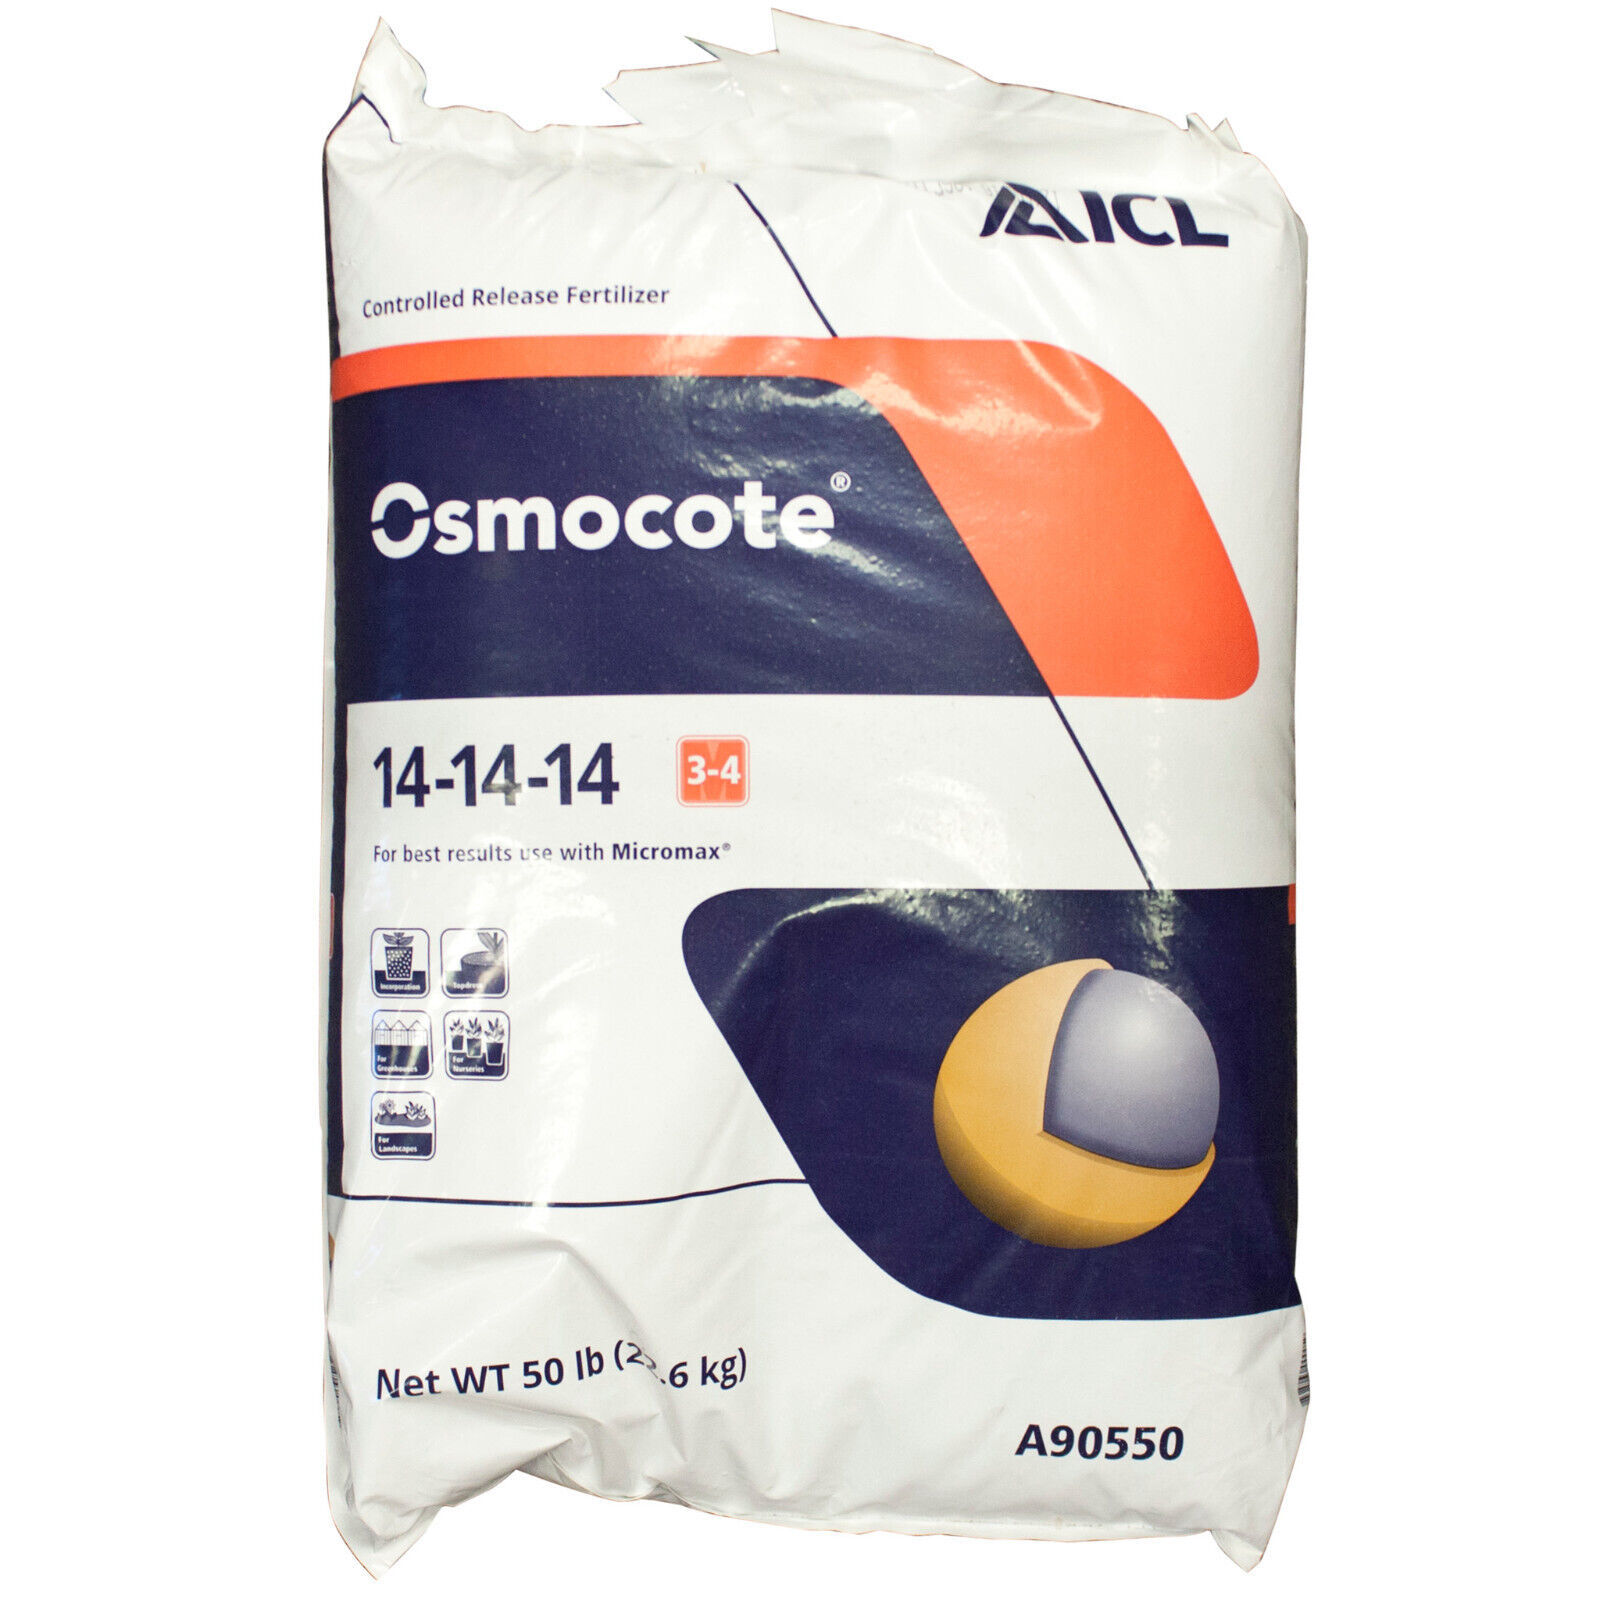 Primary image for Osmocote Classic 3-4 Month 14-14-14 Fertilizing Granules E90550 ( 50 lbs )